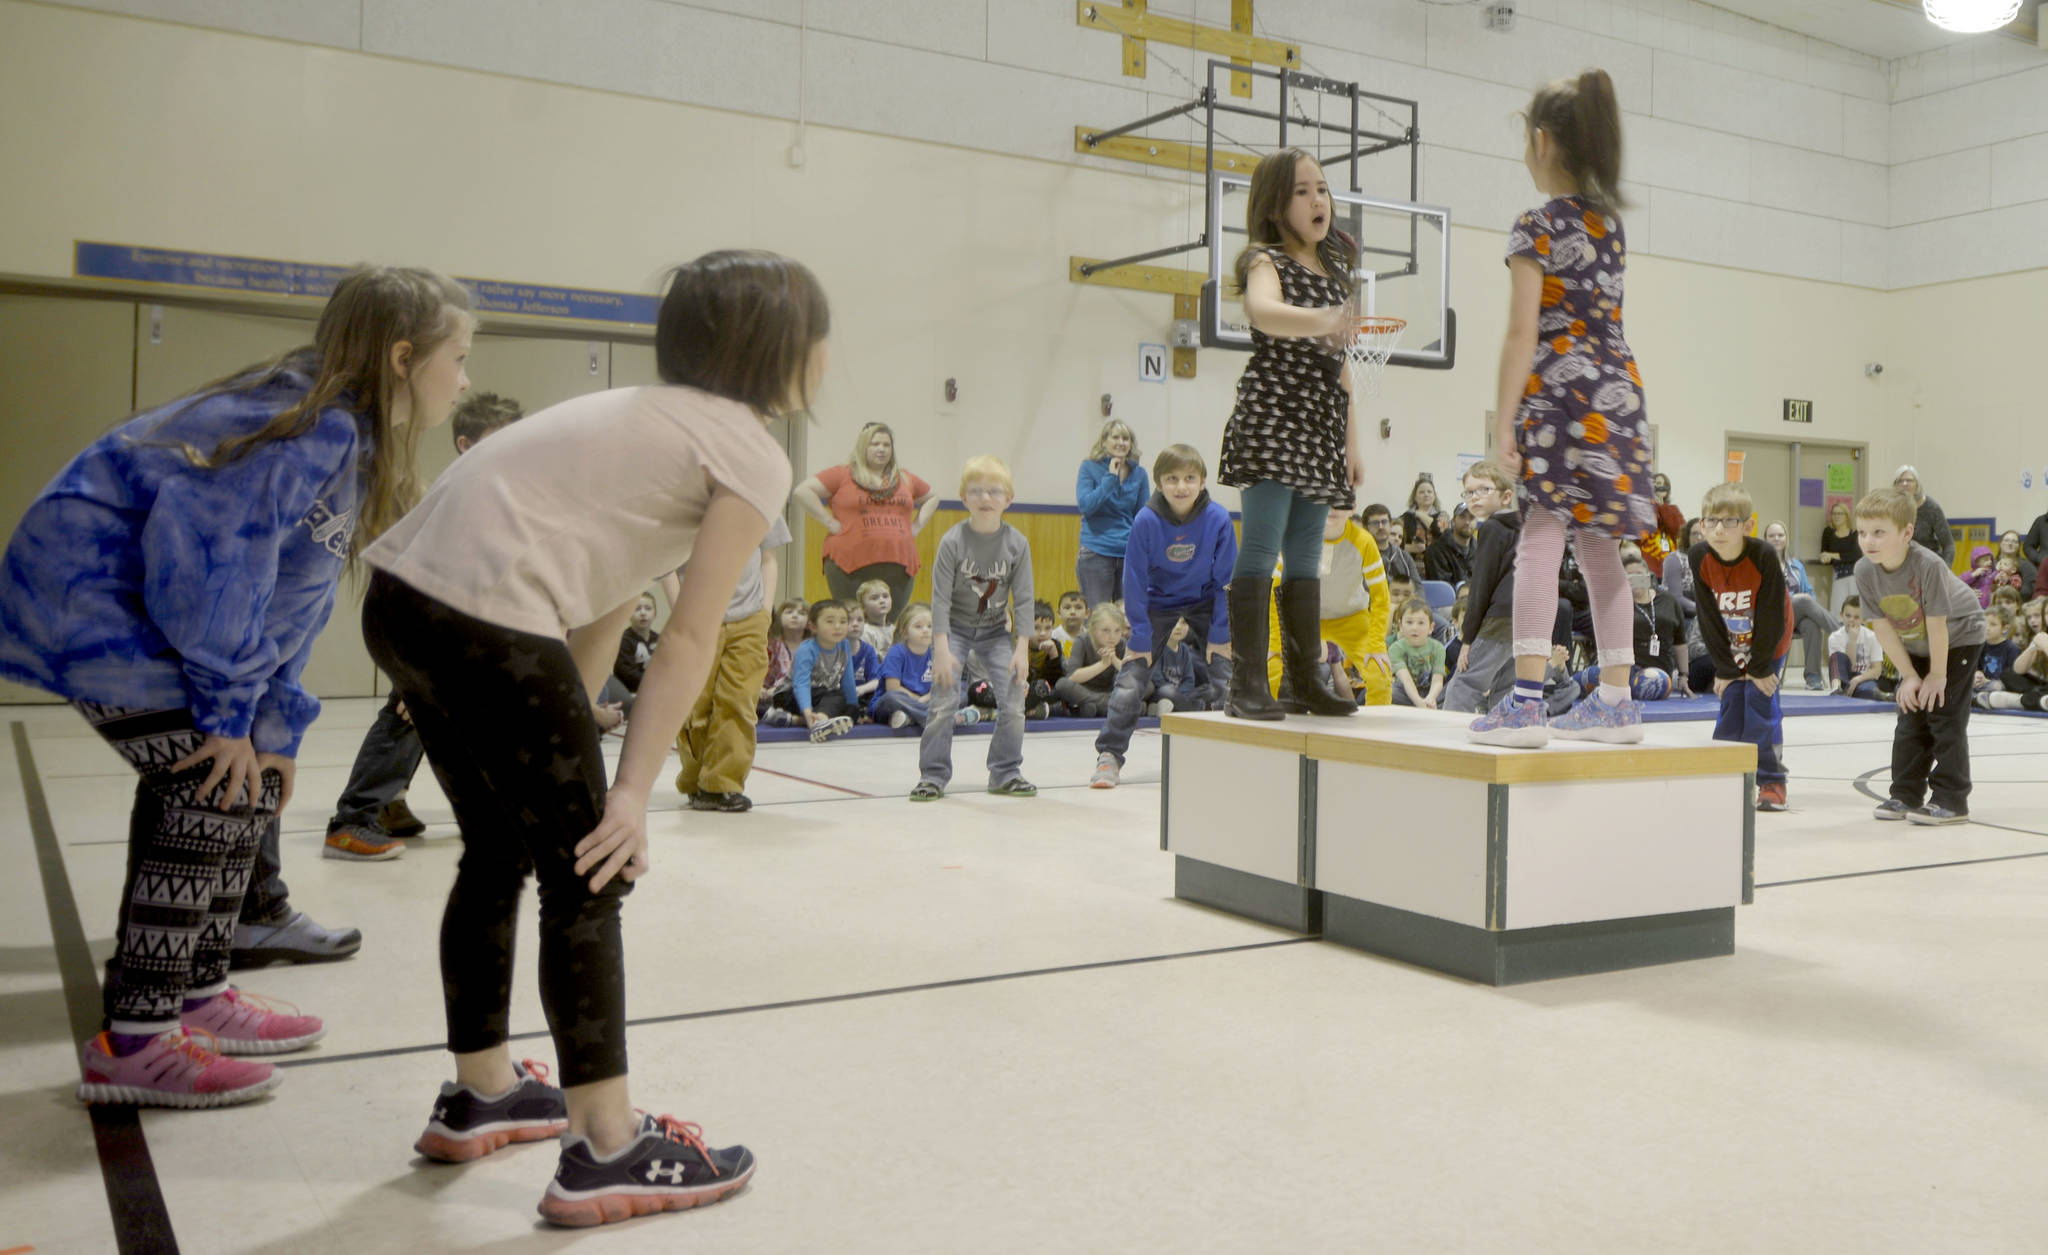 Kindergarten students at Kaleidoscope School of Arts and Science acted out a scene from Shakespeare’s “A Midsummer Night’s Dream” on Thursday, March 9, 2017 as the culmination of Artist In Residence Elizabeth Ware’s work with the students. (Kat Sorensen/Peninsula Clarion)